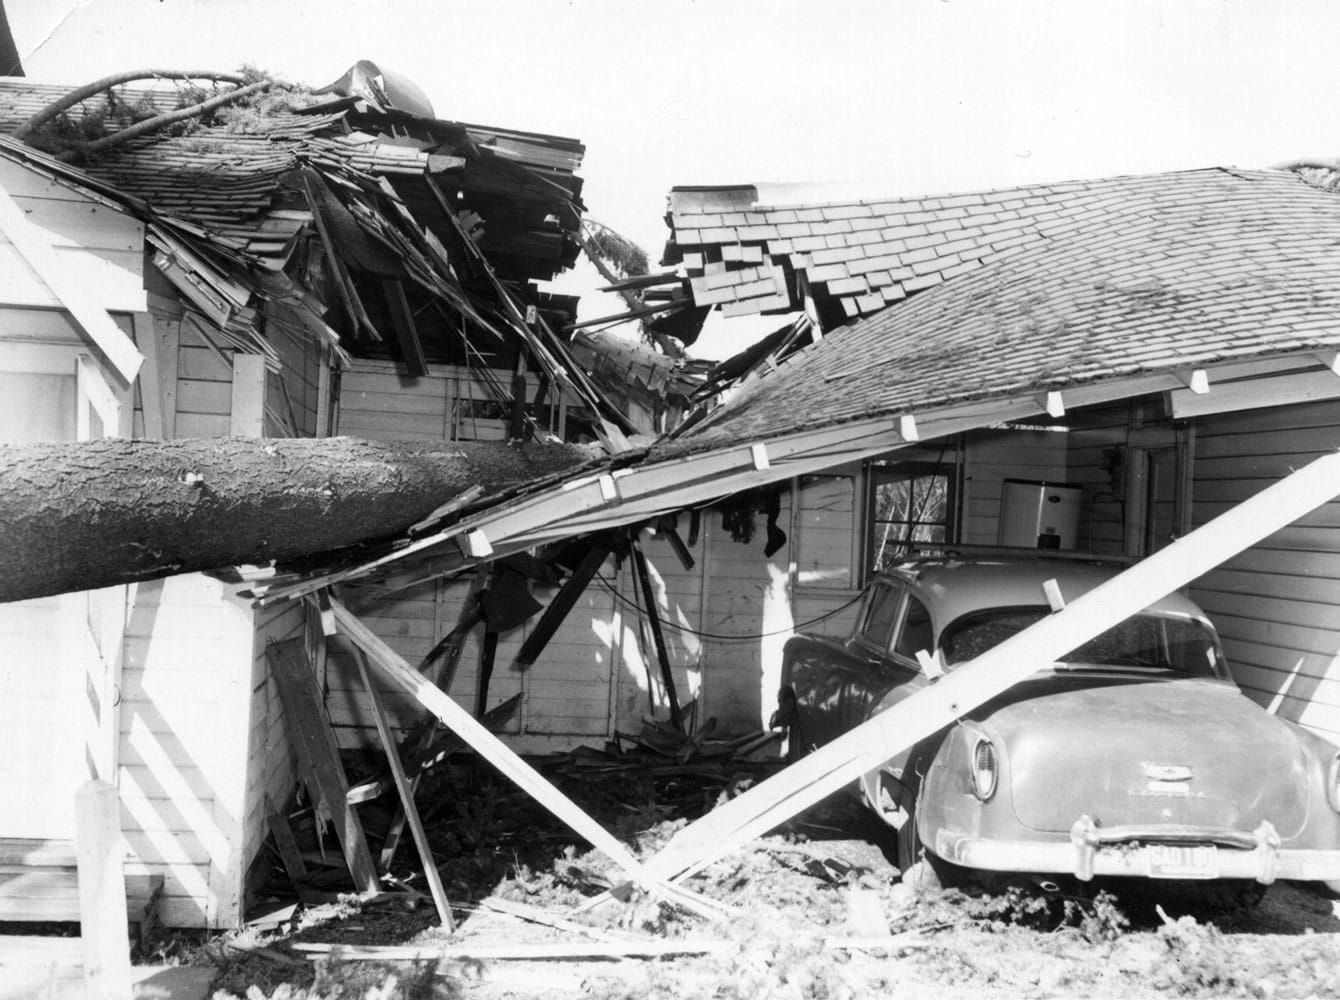 Files/The Columbian
A namesake tree at Fir Grove Auto Trailer Court at 46th and Main streets crashed through a garage roof during the Columbus Day Storm in 1962.